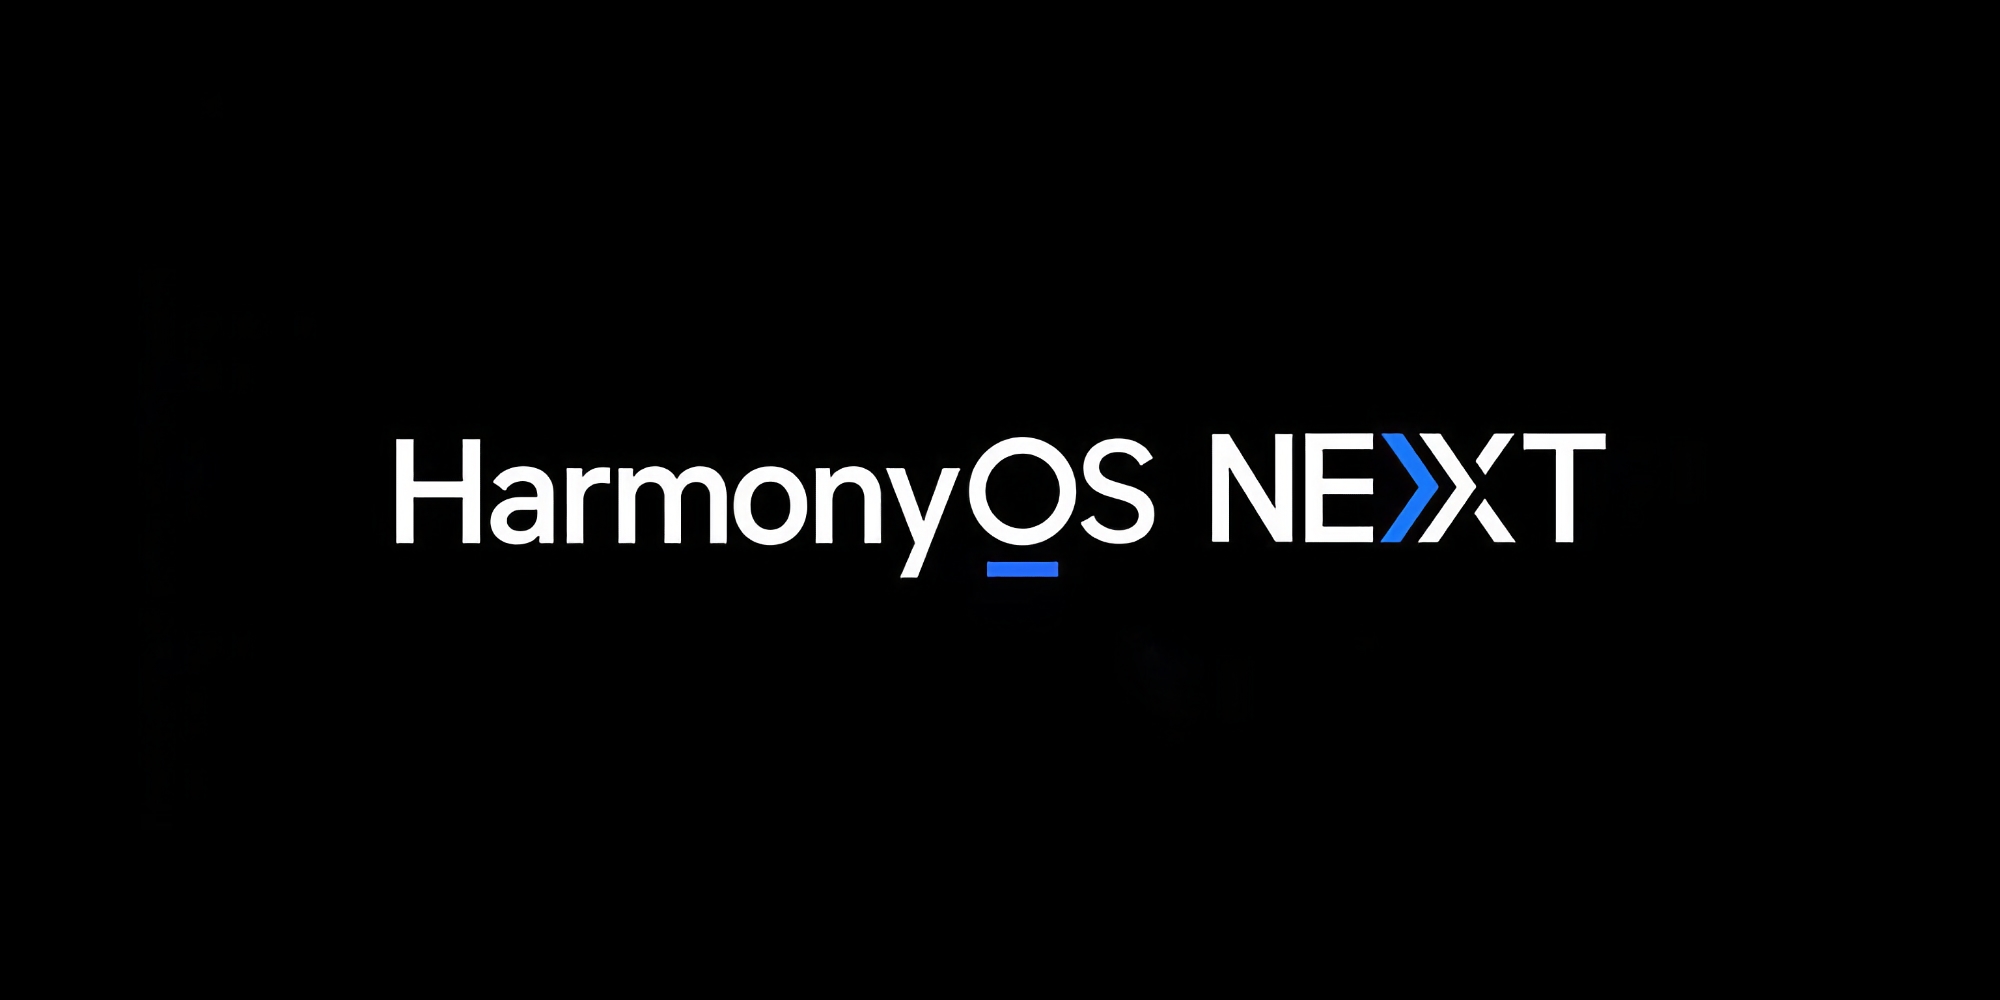 Huawei will remove support for Android apps in HarmonyOS Next